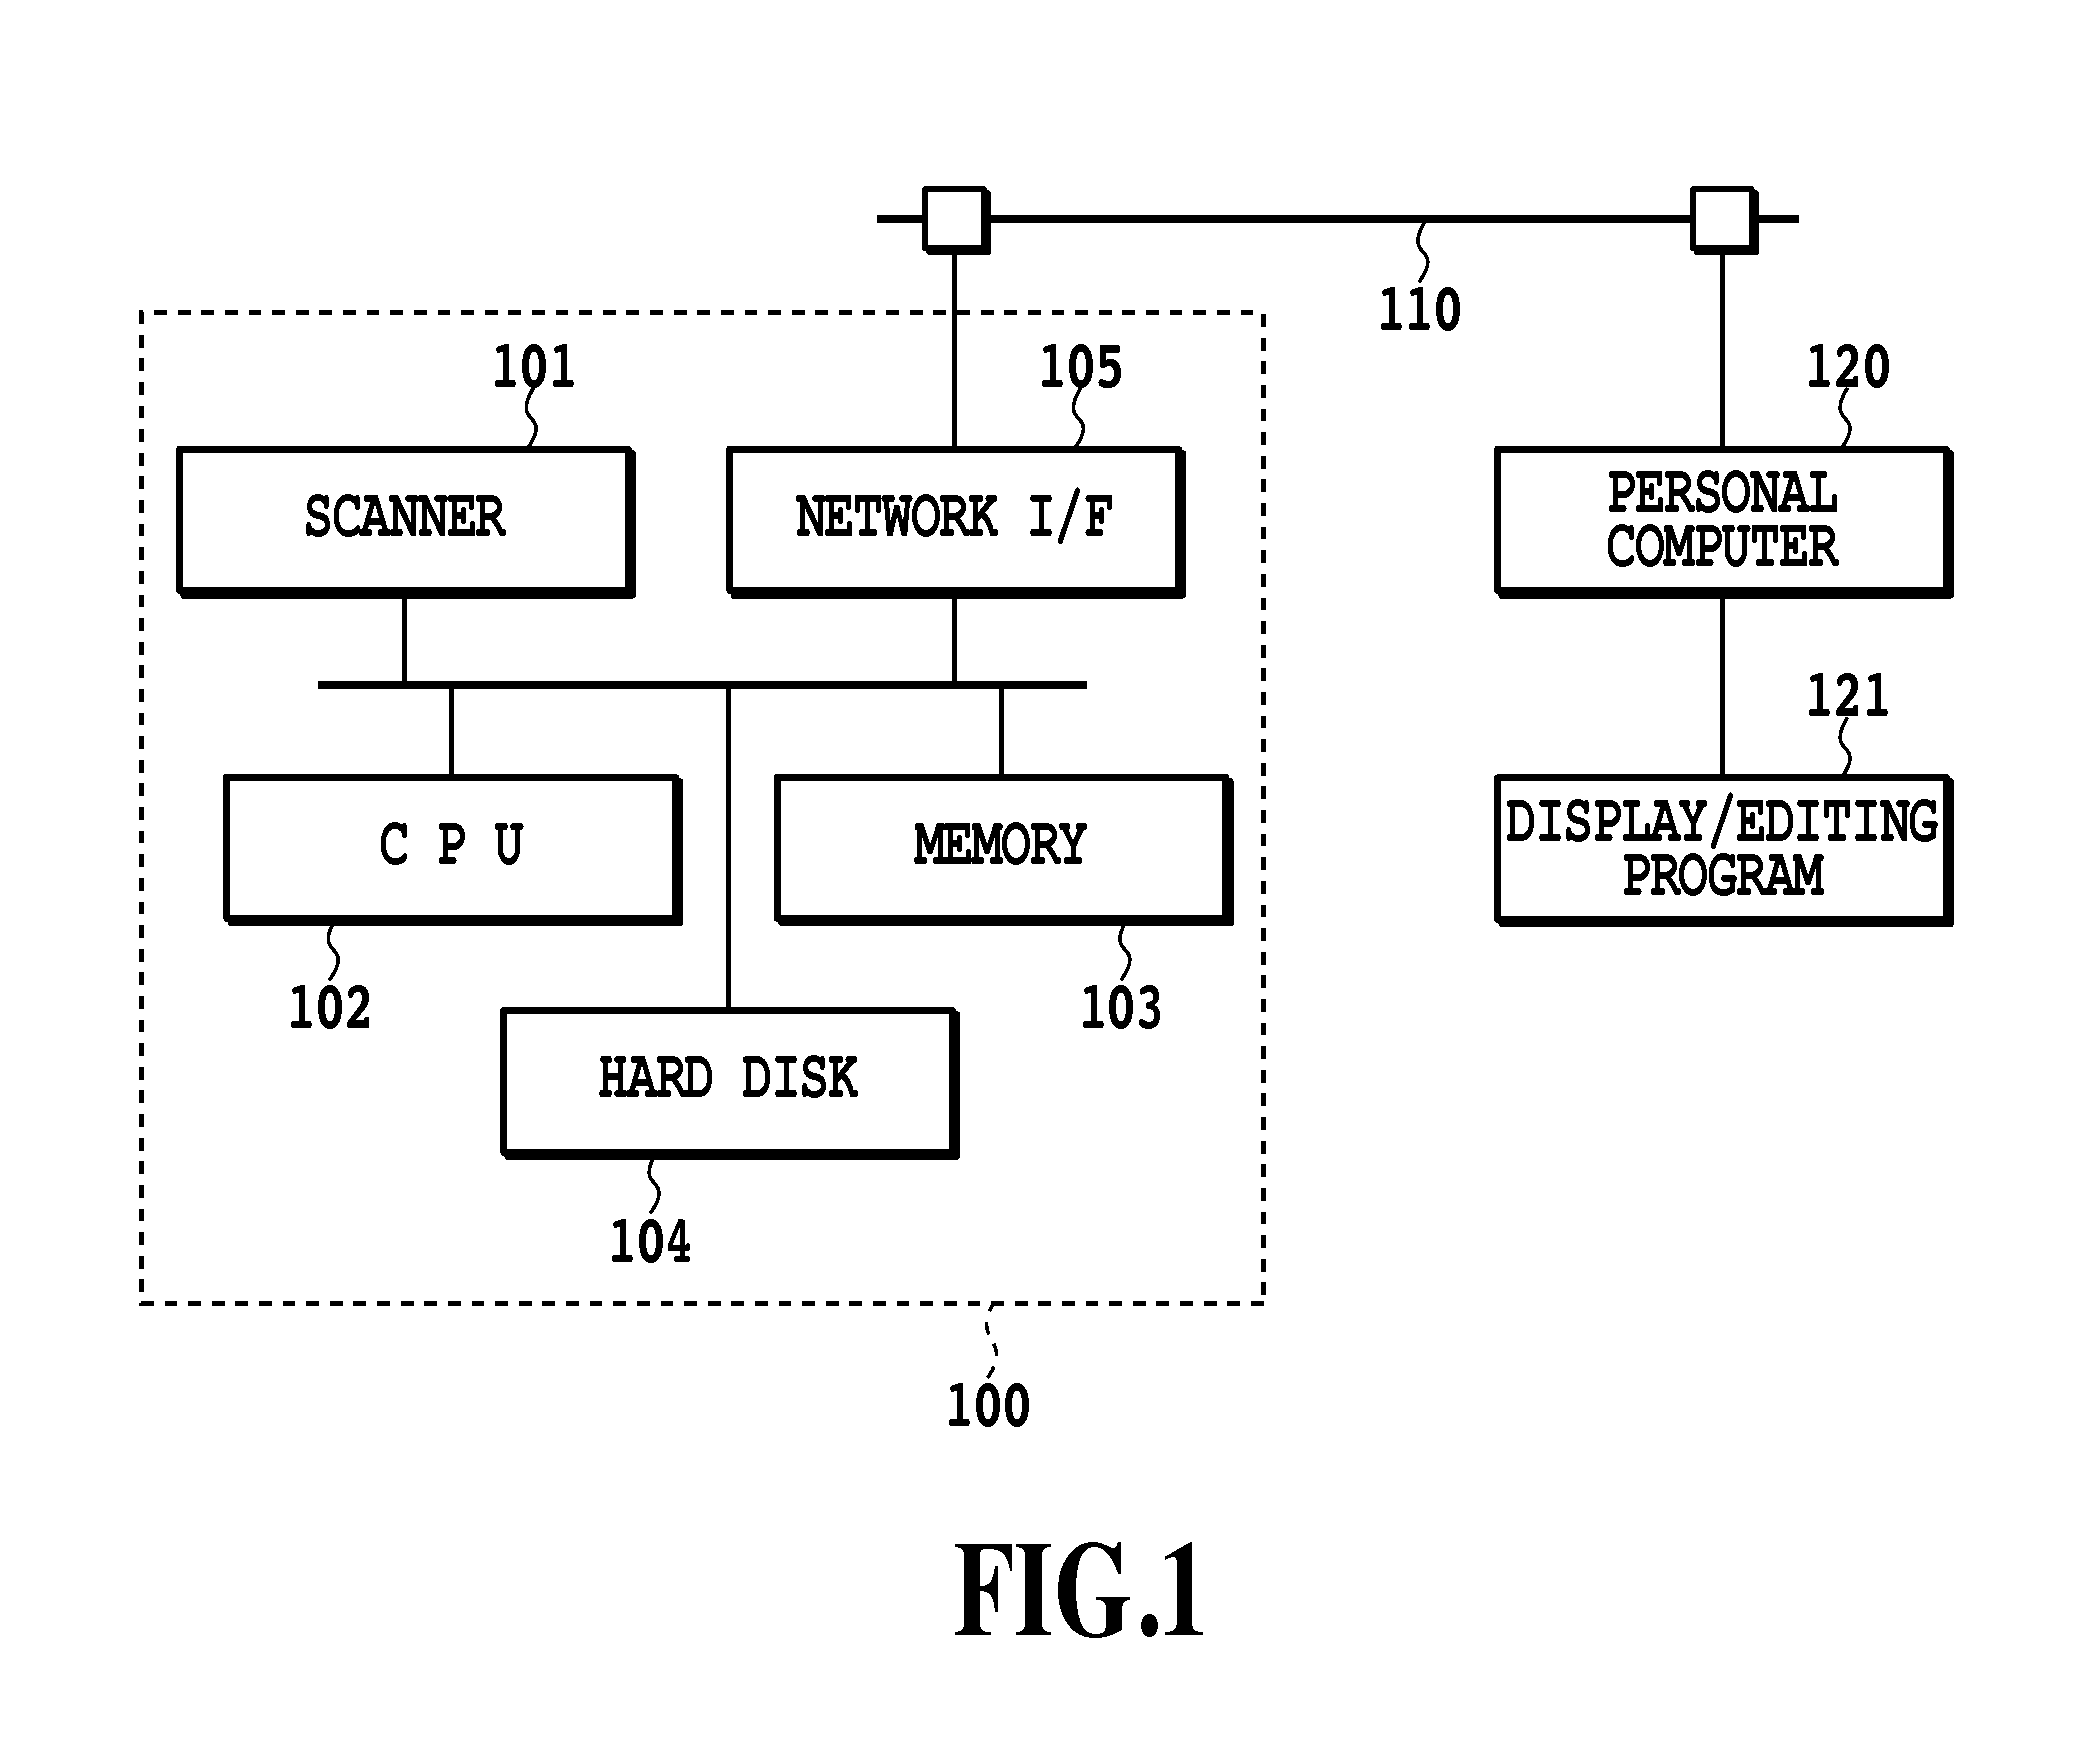 Apparatus and method for digitizing documents with extracted region data